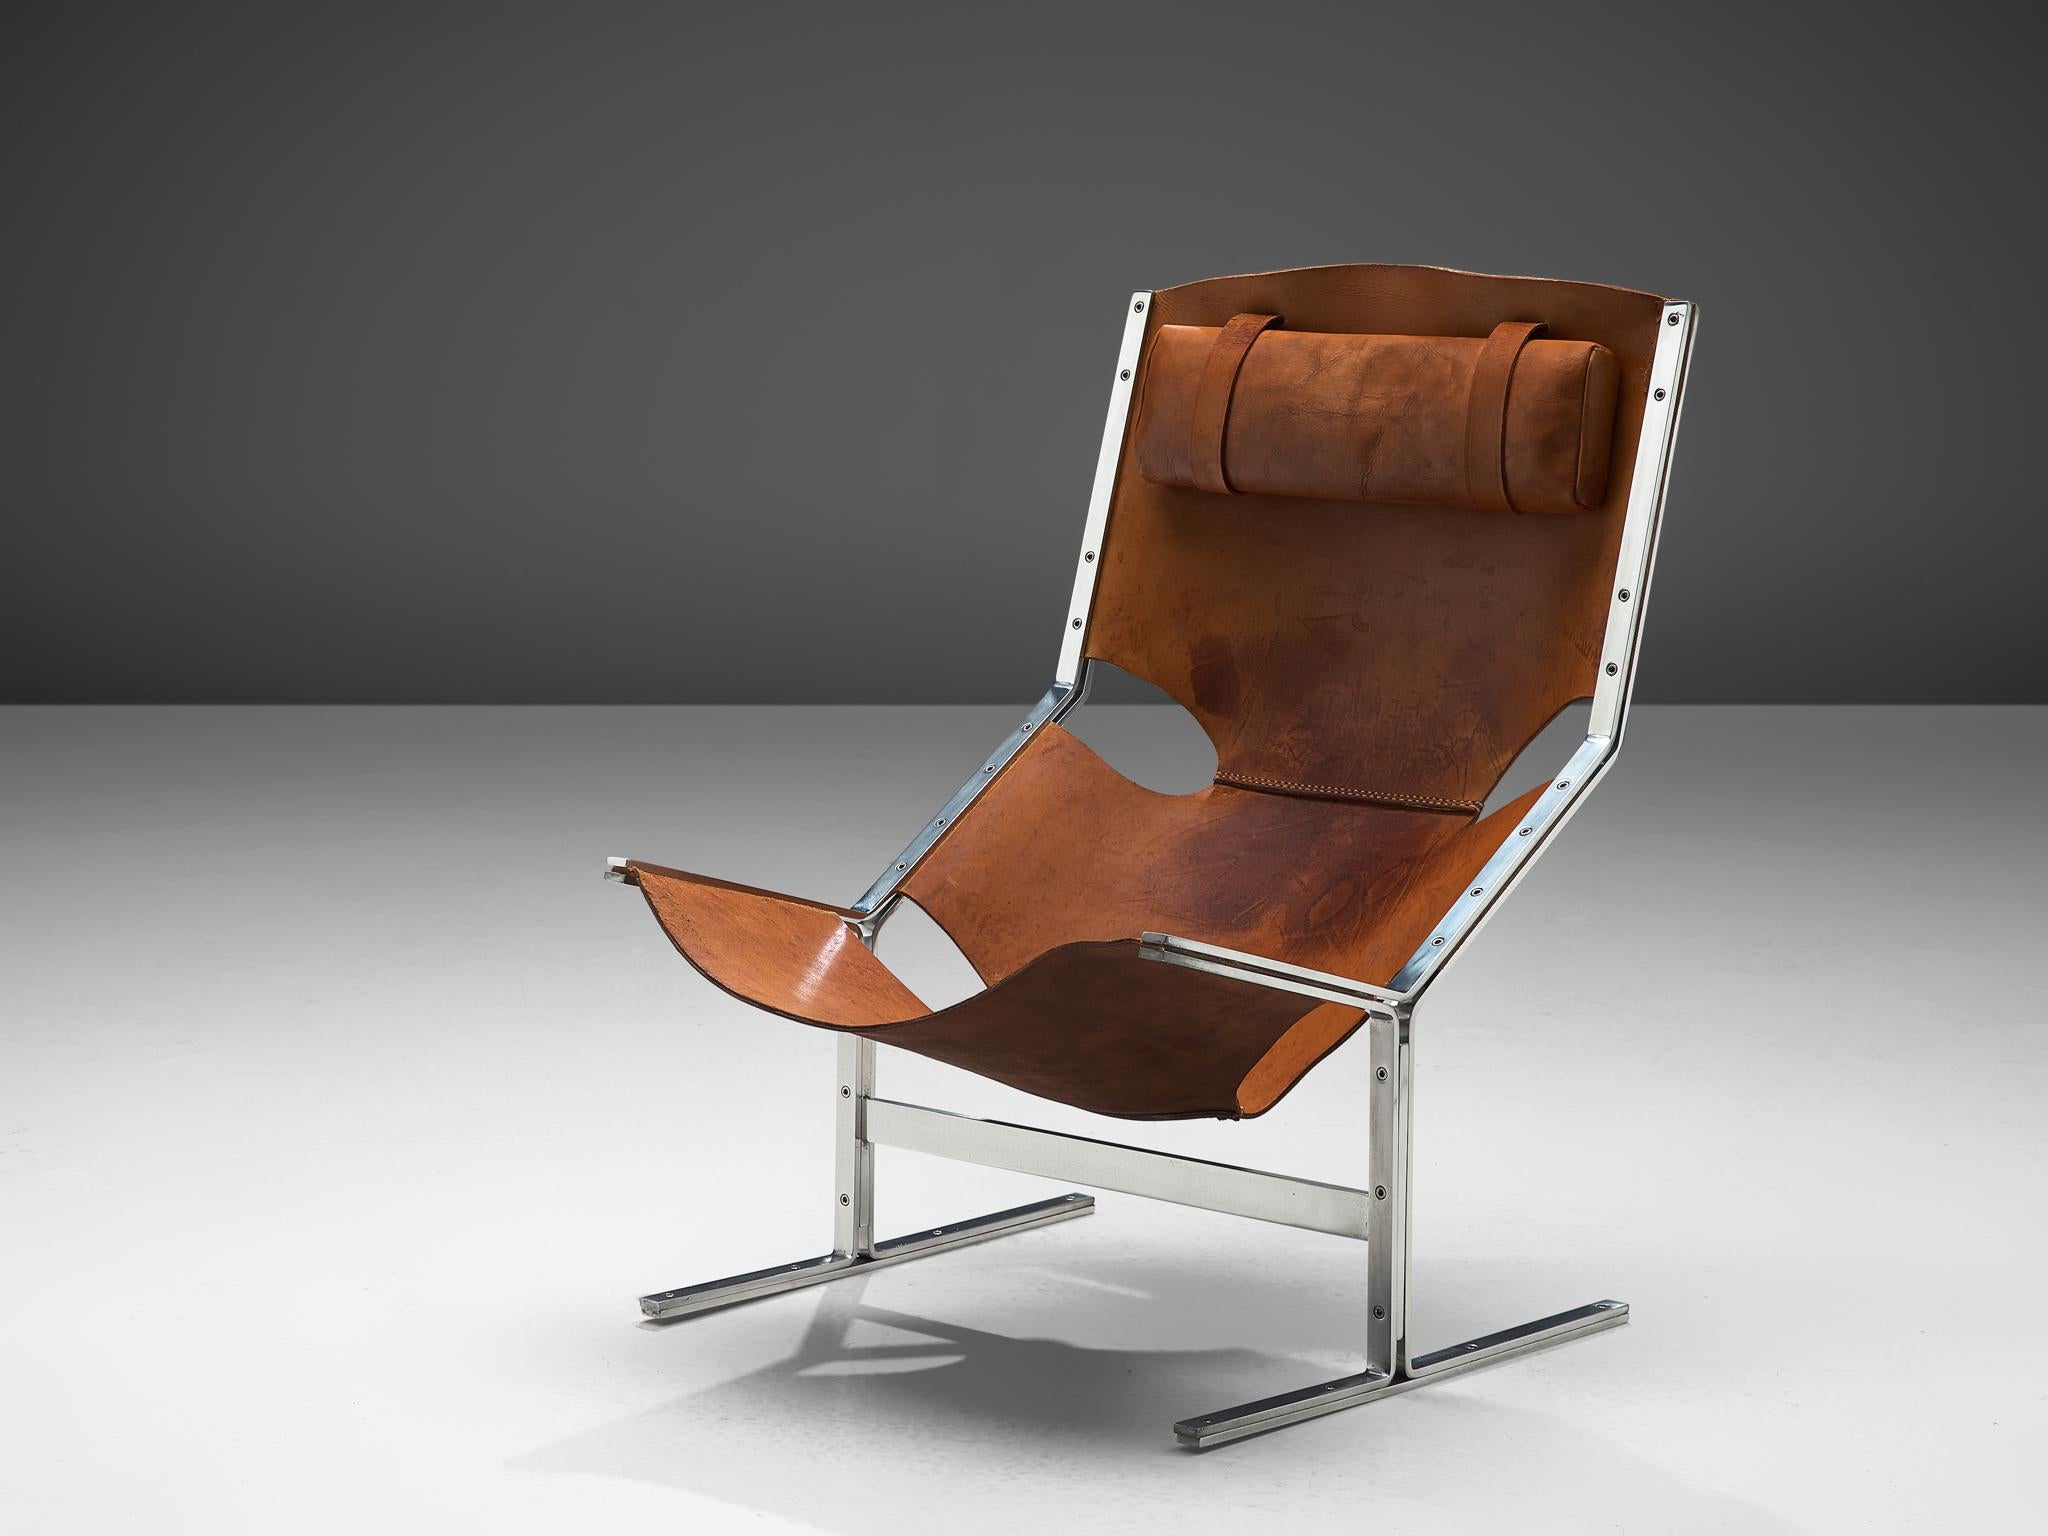 Abraham Polak Furniture, easy chair, leather and steel, The Netherlands, 1960s.

Rare modern lounge chair by Abraham Polak Furniture. This is wonderful sling chair with strong features of the designs by Pierre Paulin. This chair shows sharp lines